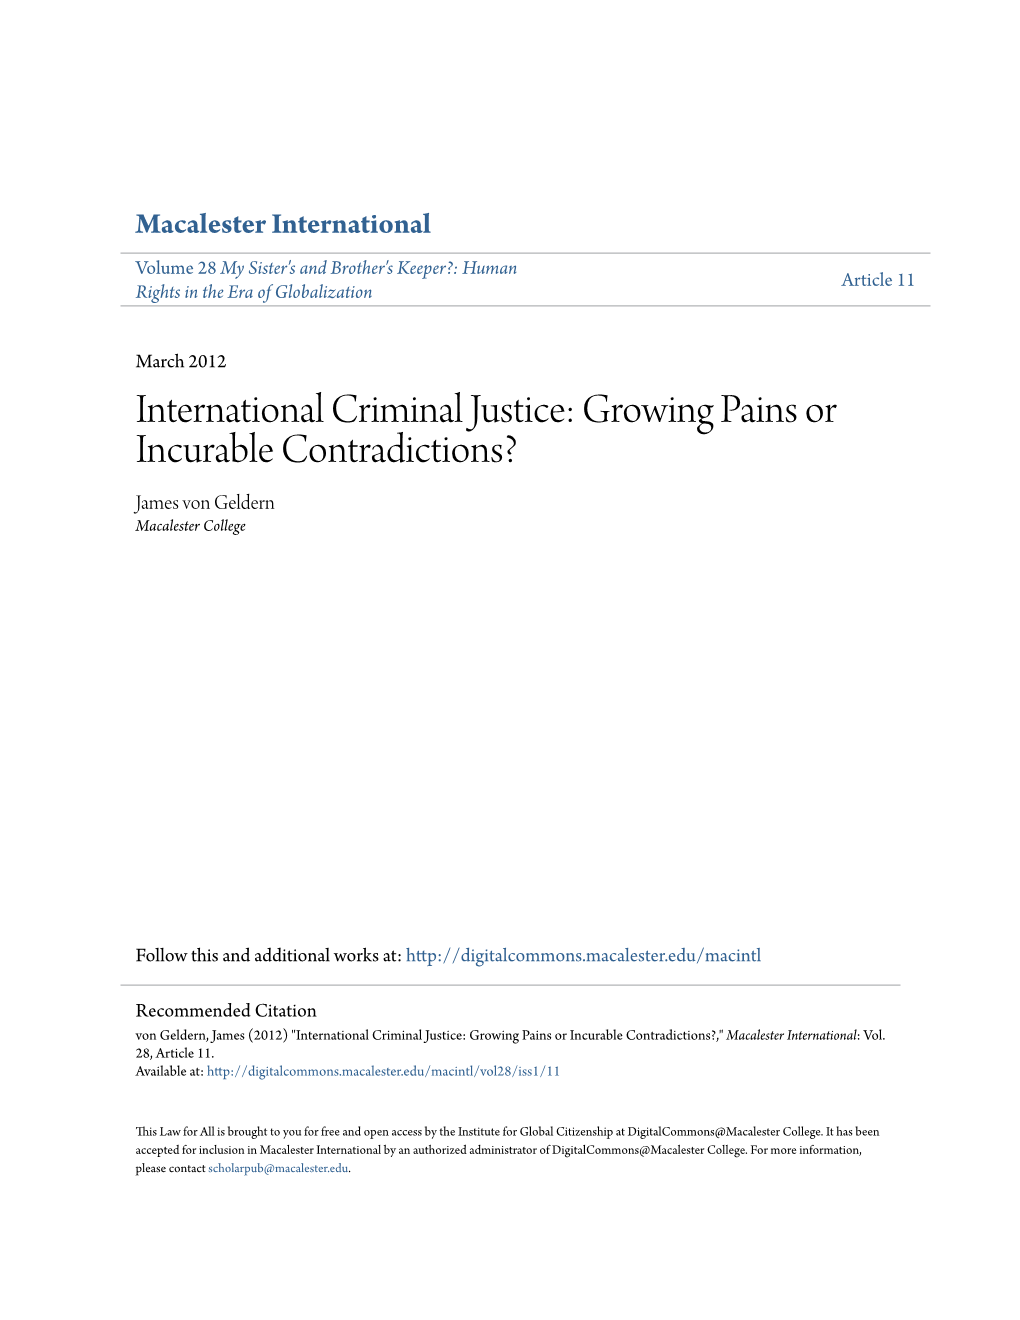 International Criminal Justice: Growing Pains Or Incurable Contradictions? James Von Geldern Macalester College